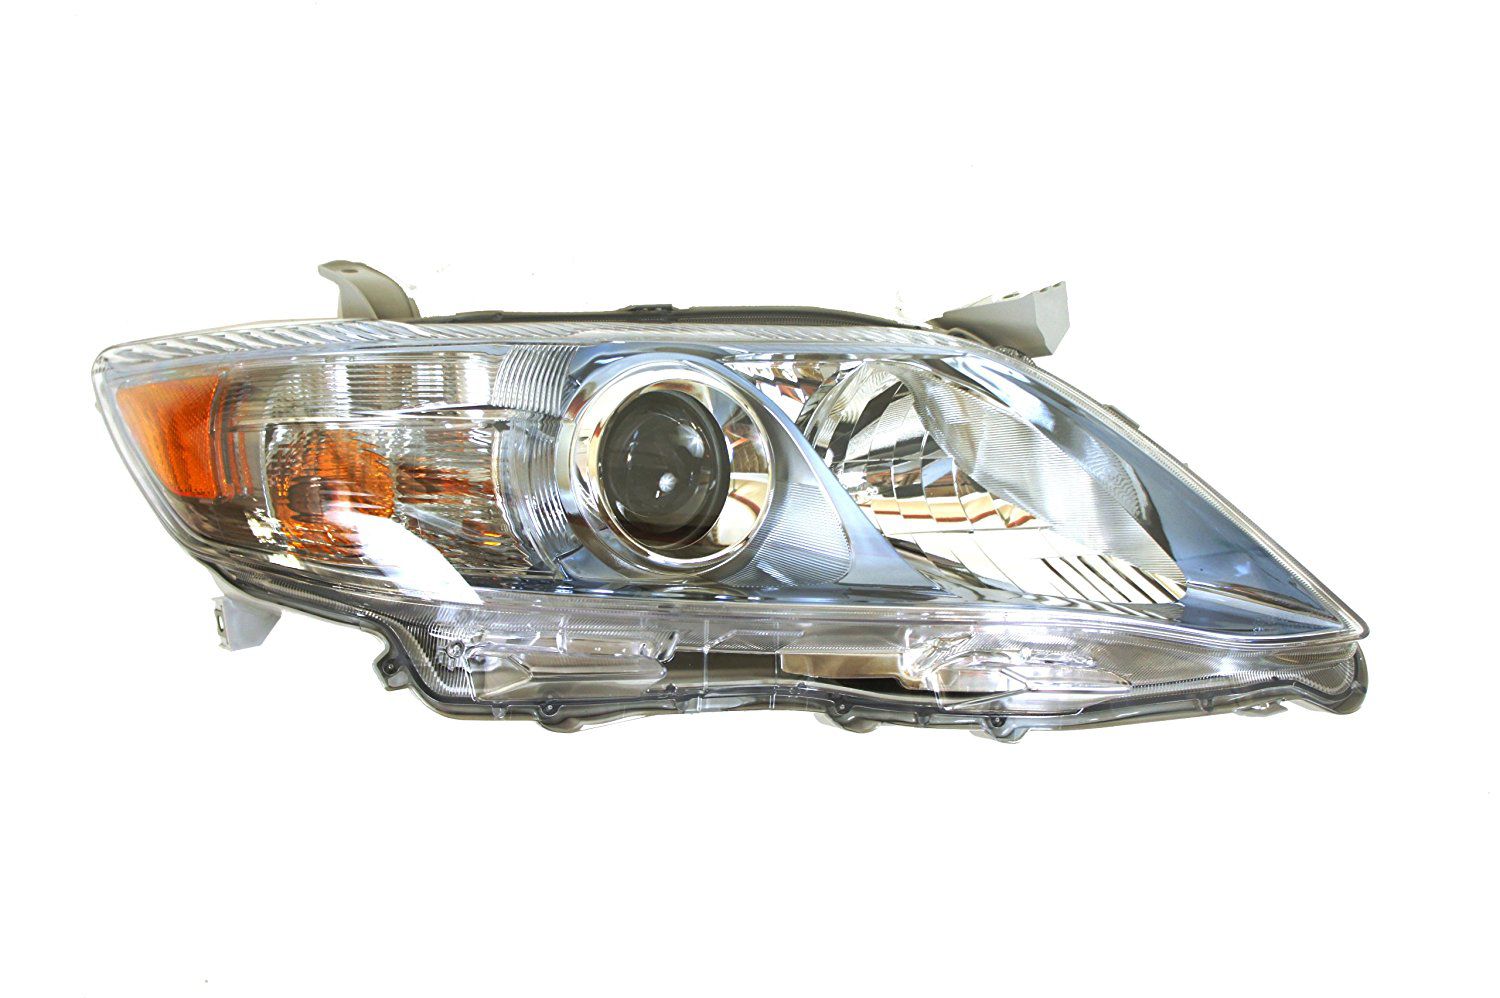 TOYOTA CAMRY Hybrid 10 11 BASE HEADLIGHTS LAMP ASSEMBLY RIGHT SIDE 81110-06520